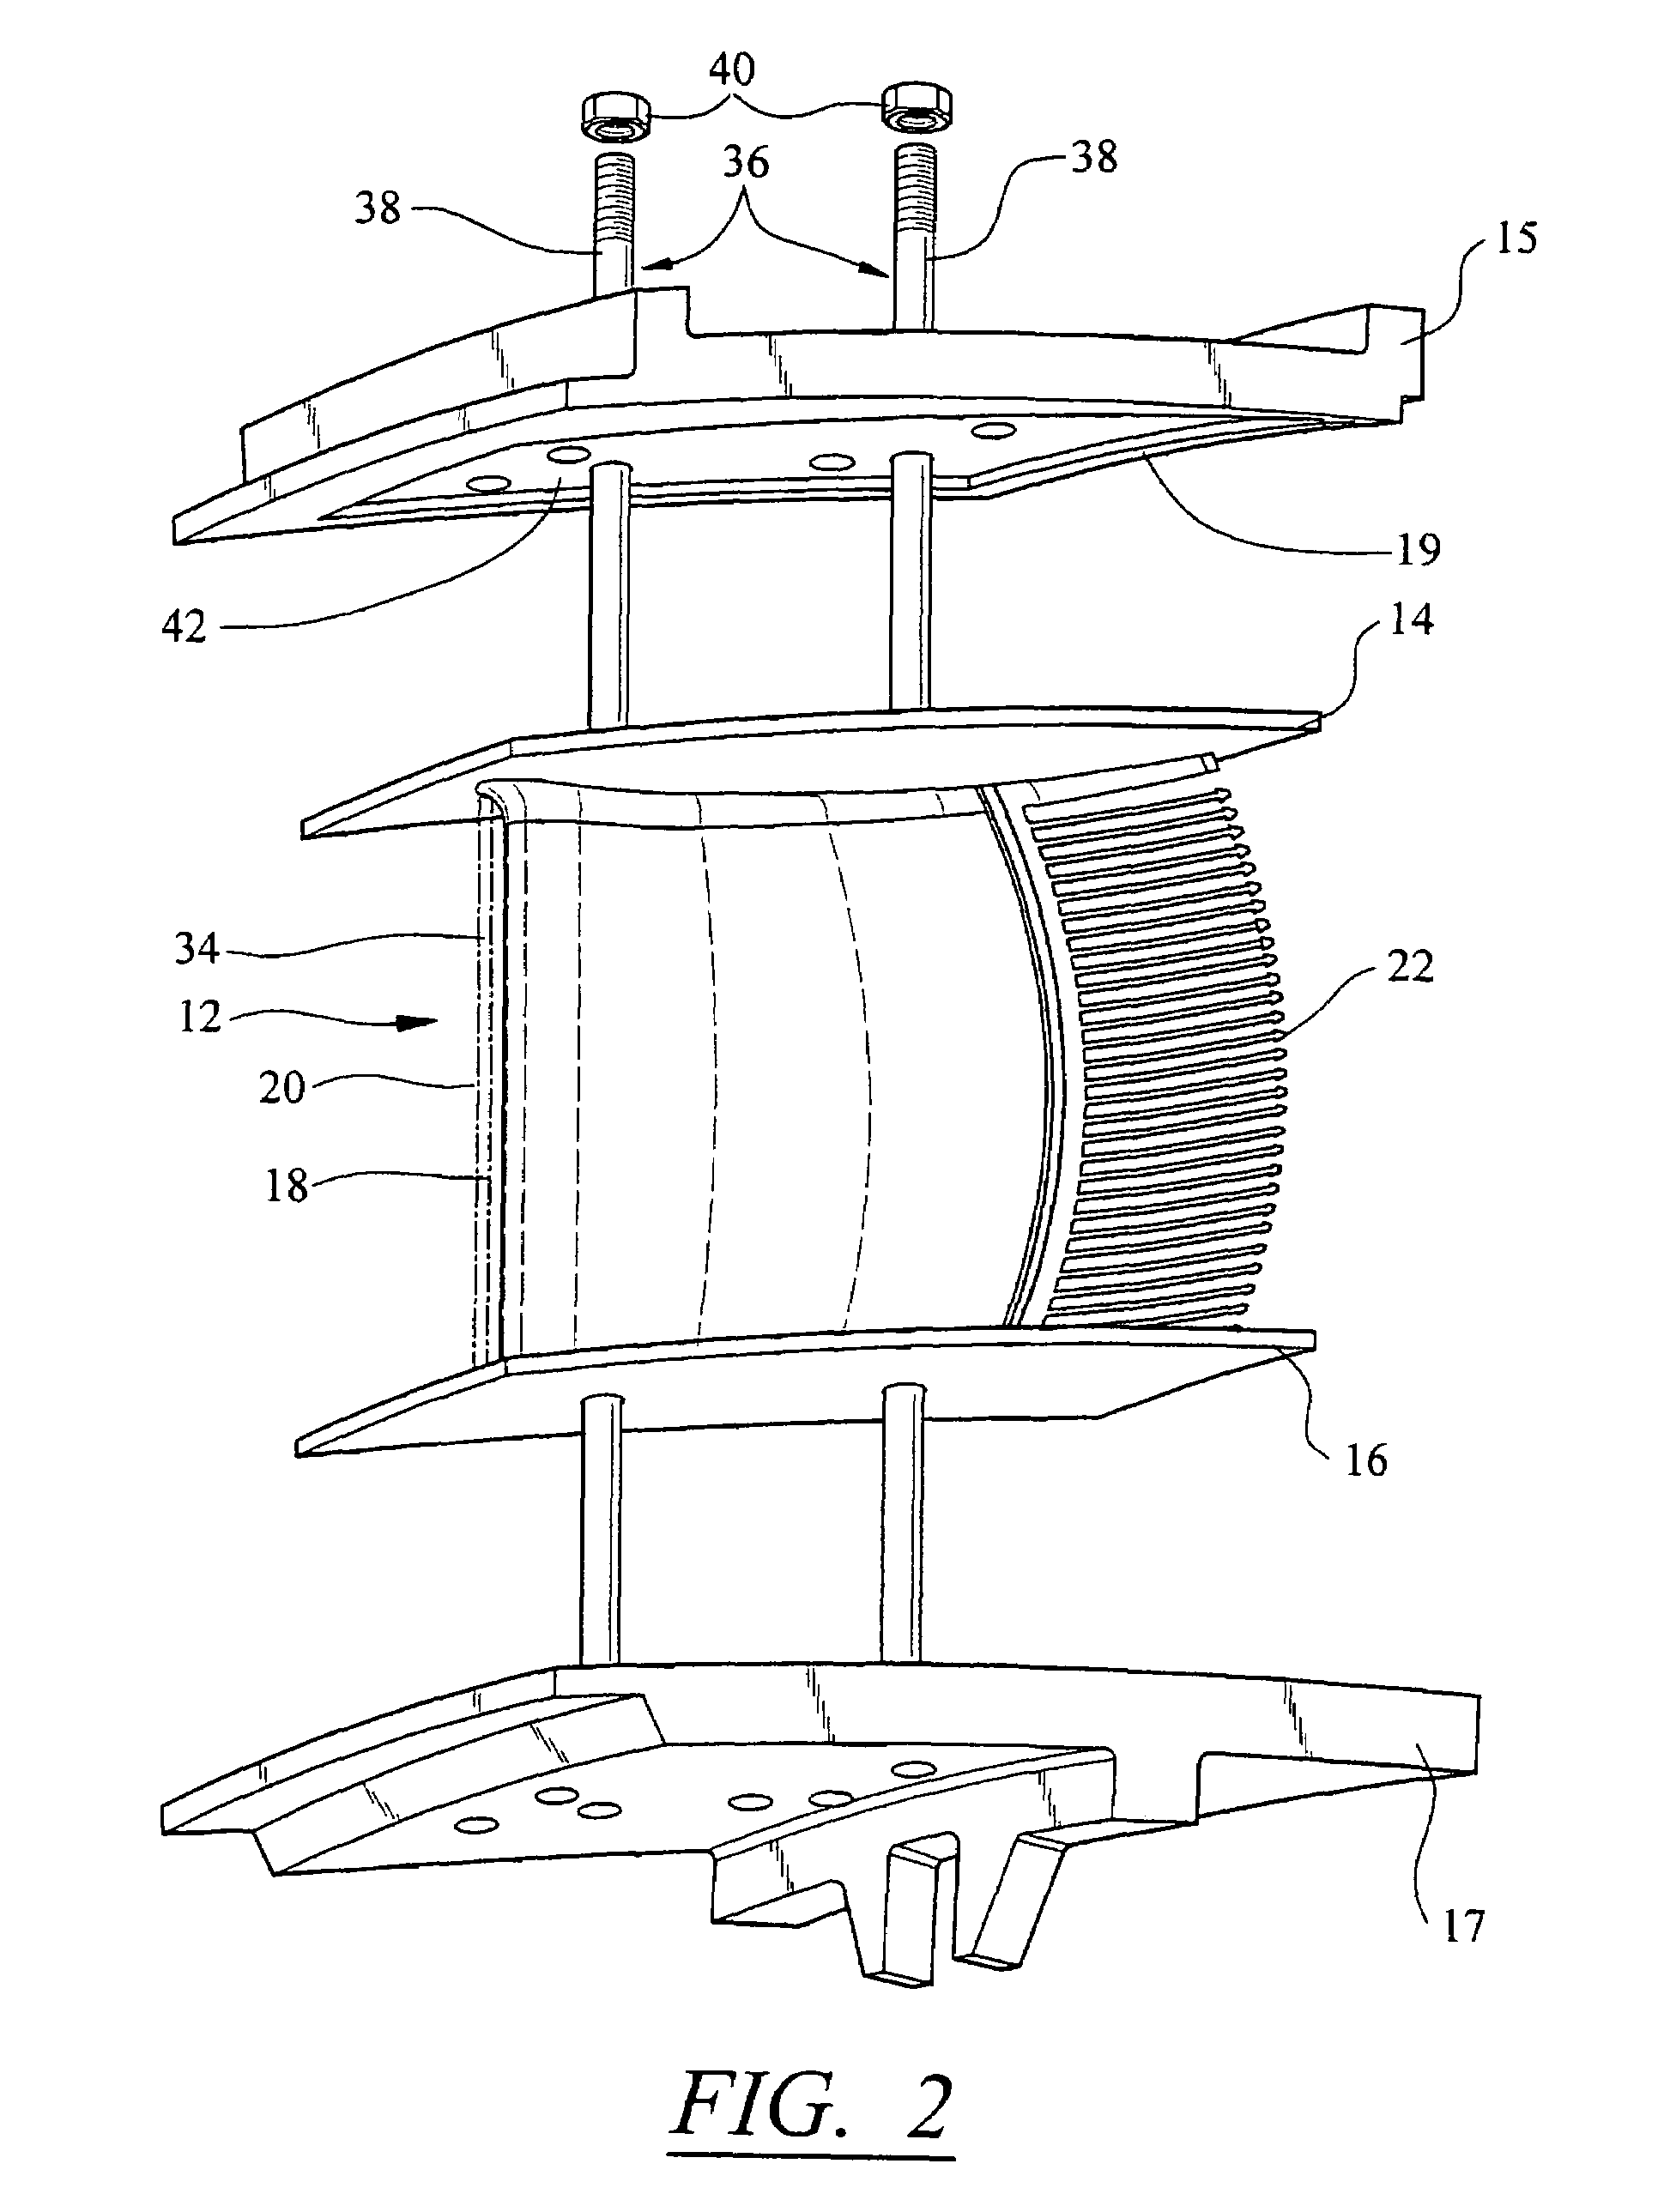 Support system for a composite airfoil in a turbine engine